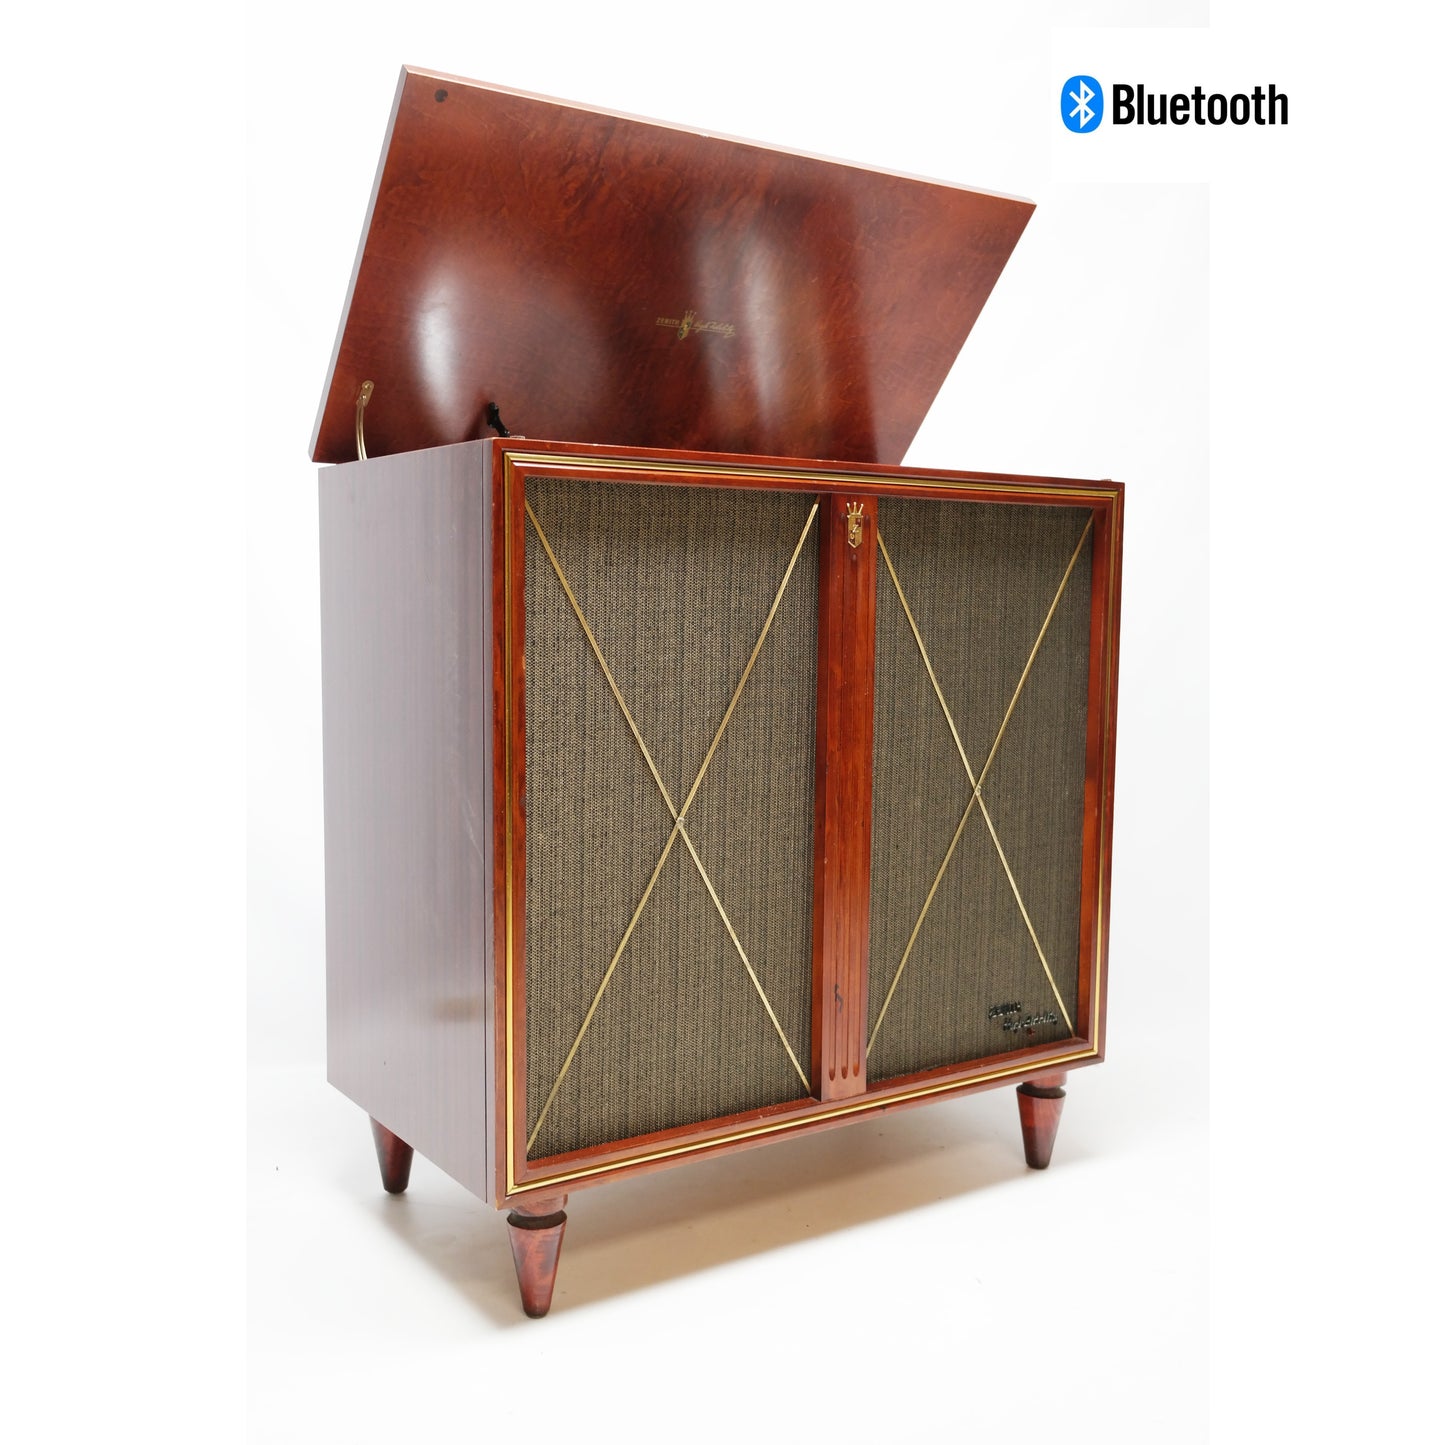 **SOLD OUT** ZENITH High Fidelity Console Record Player Changer - Bluetooth The Vintedge Co.